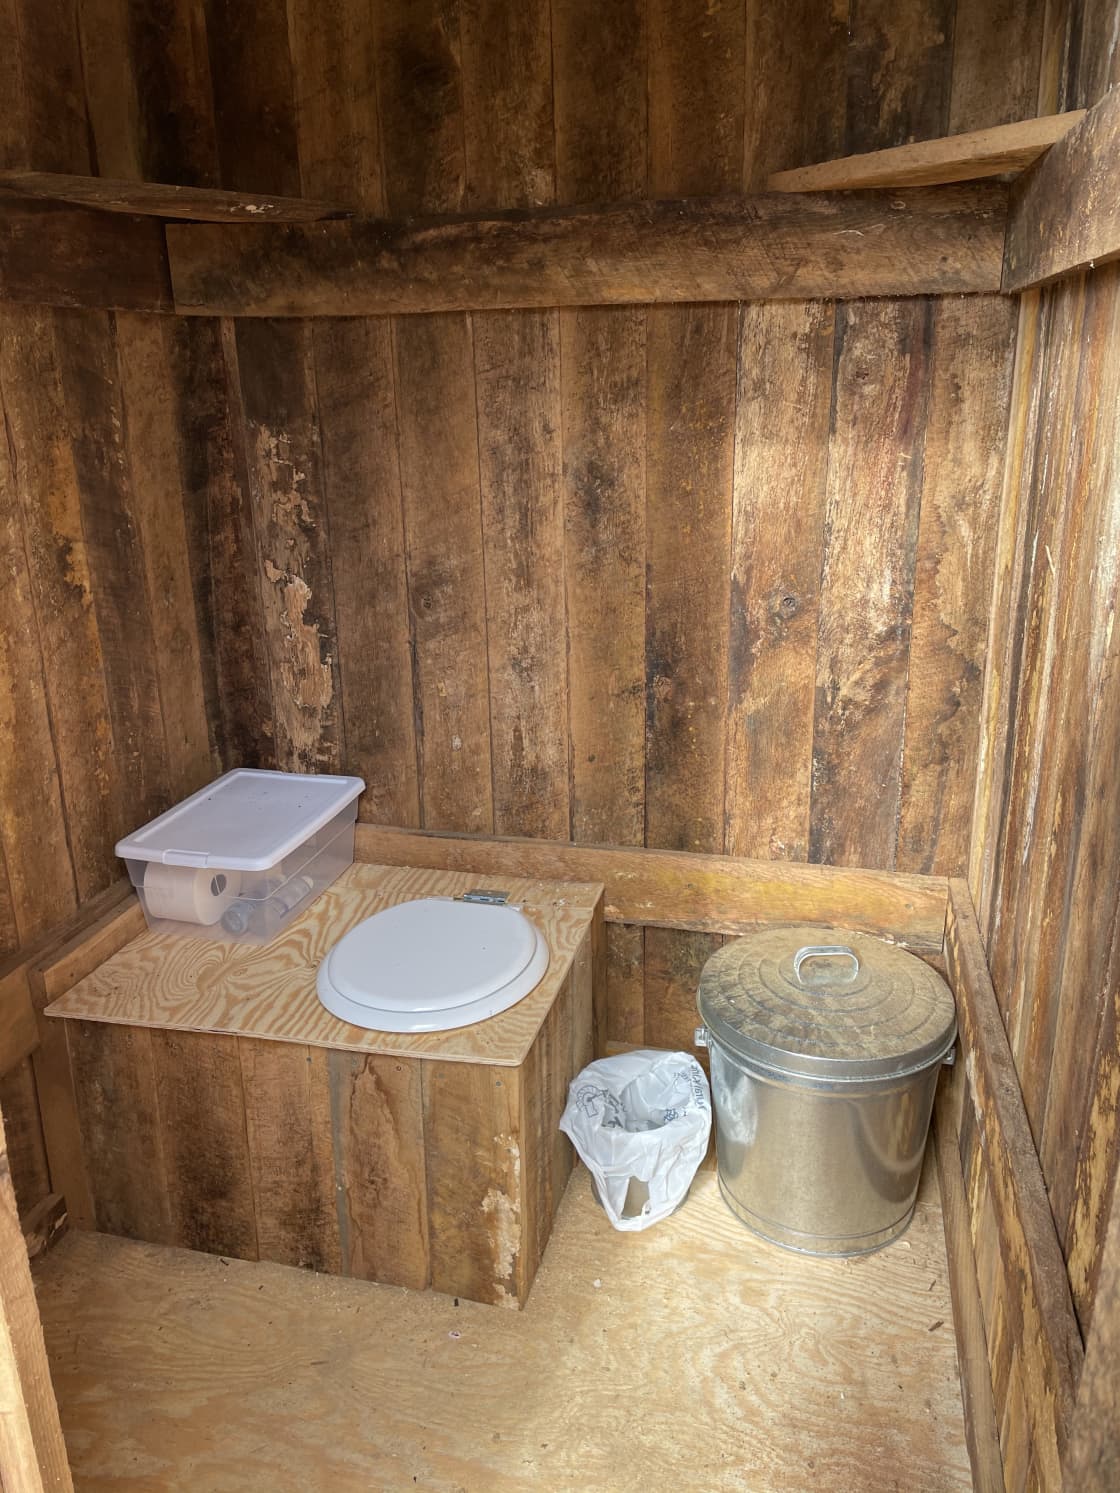 View inside the compost outhouse